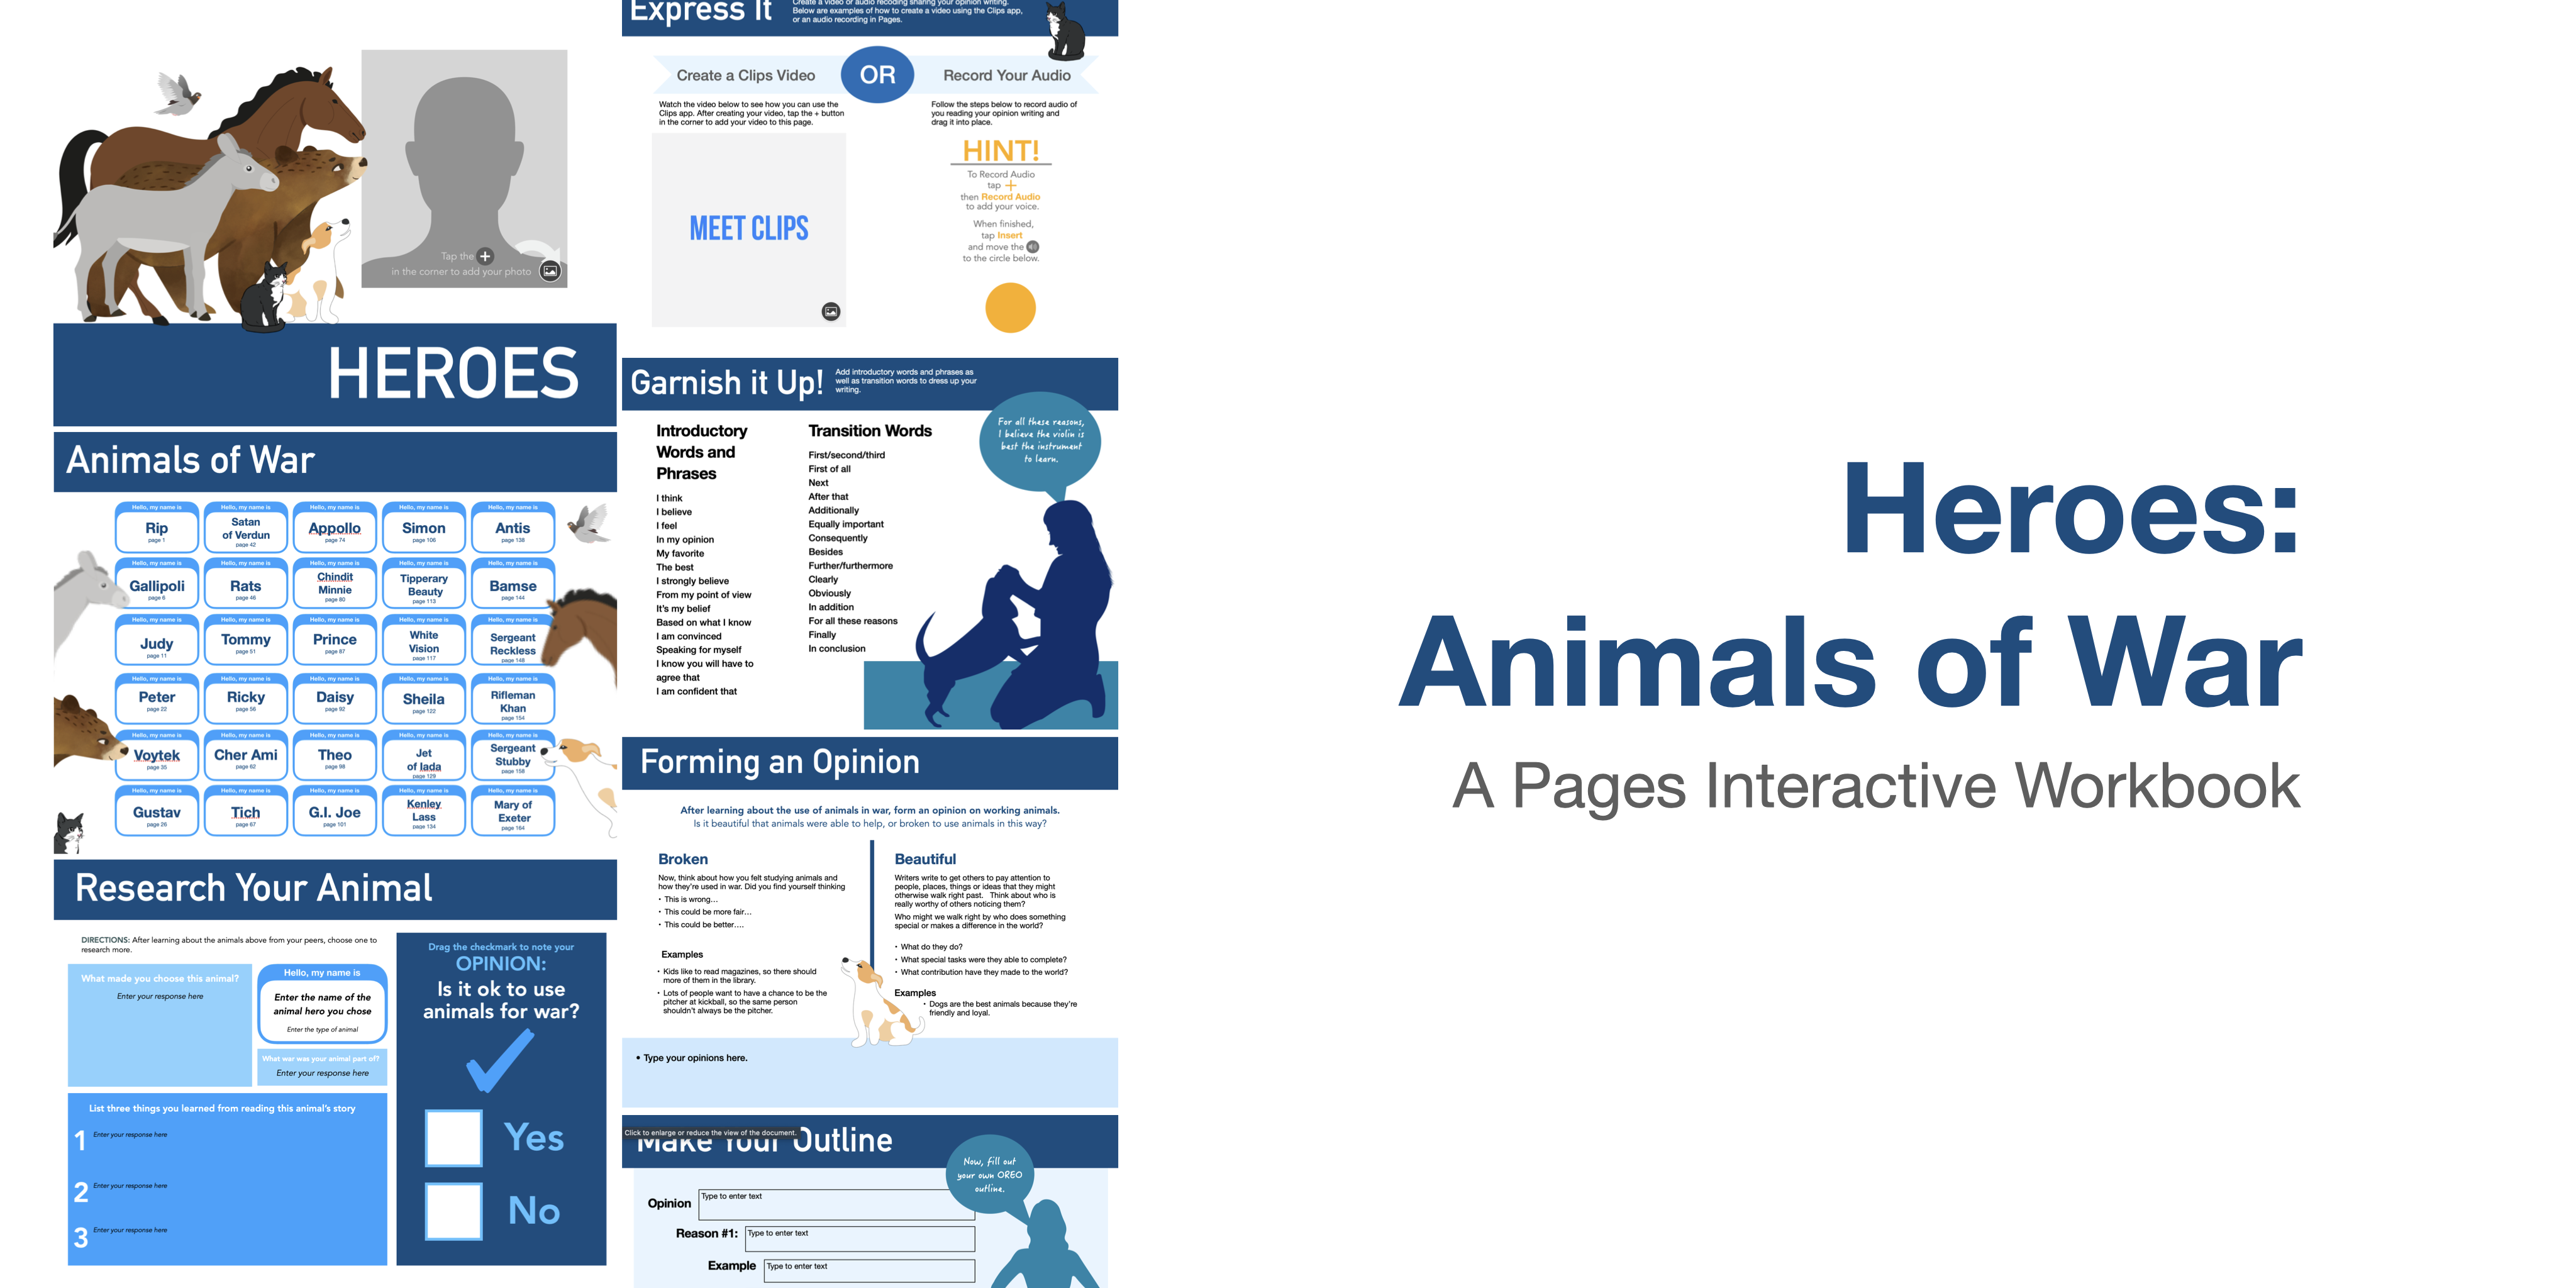 Image contains preview thumbnails of the pages in the Heroes (Animals of War) Interactive Workbook.